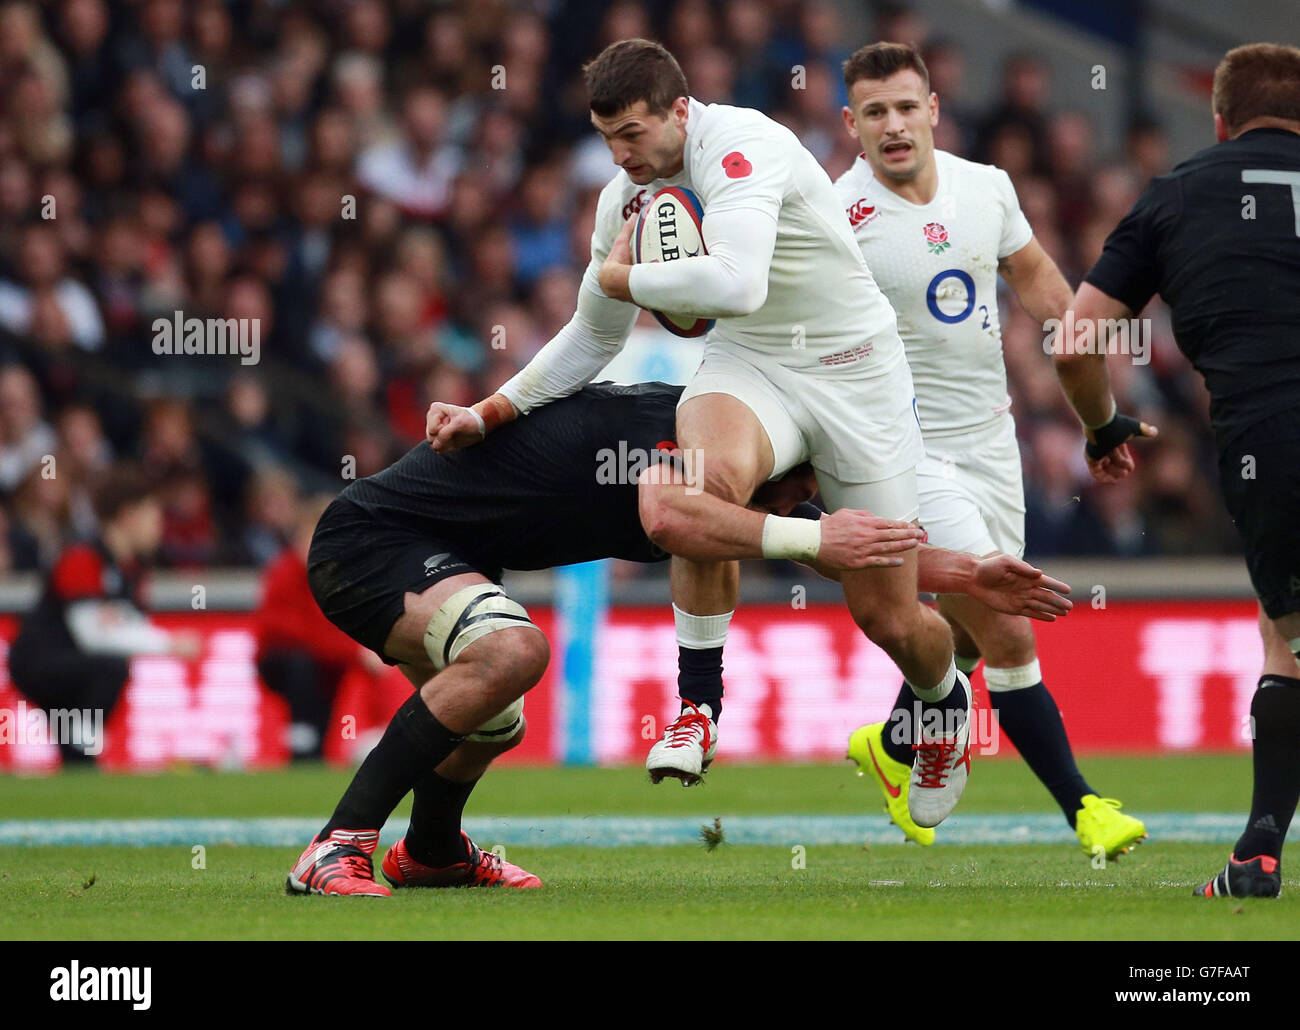 https://c8.alamy.com/comp/G7FAAT/englands-jonny-may-is-tackled-by-new-zealands-sam-whitelock-during-G7FAAT.jpg